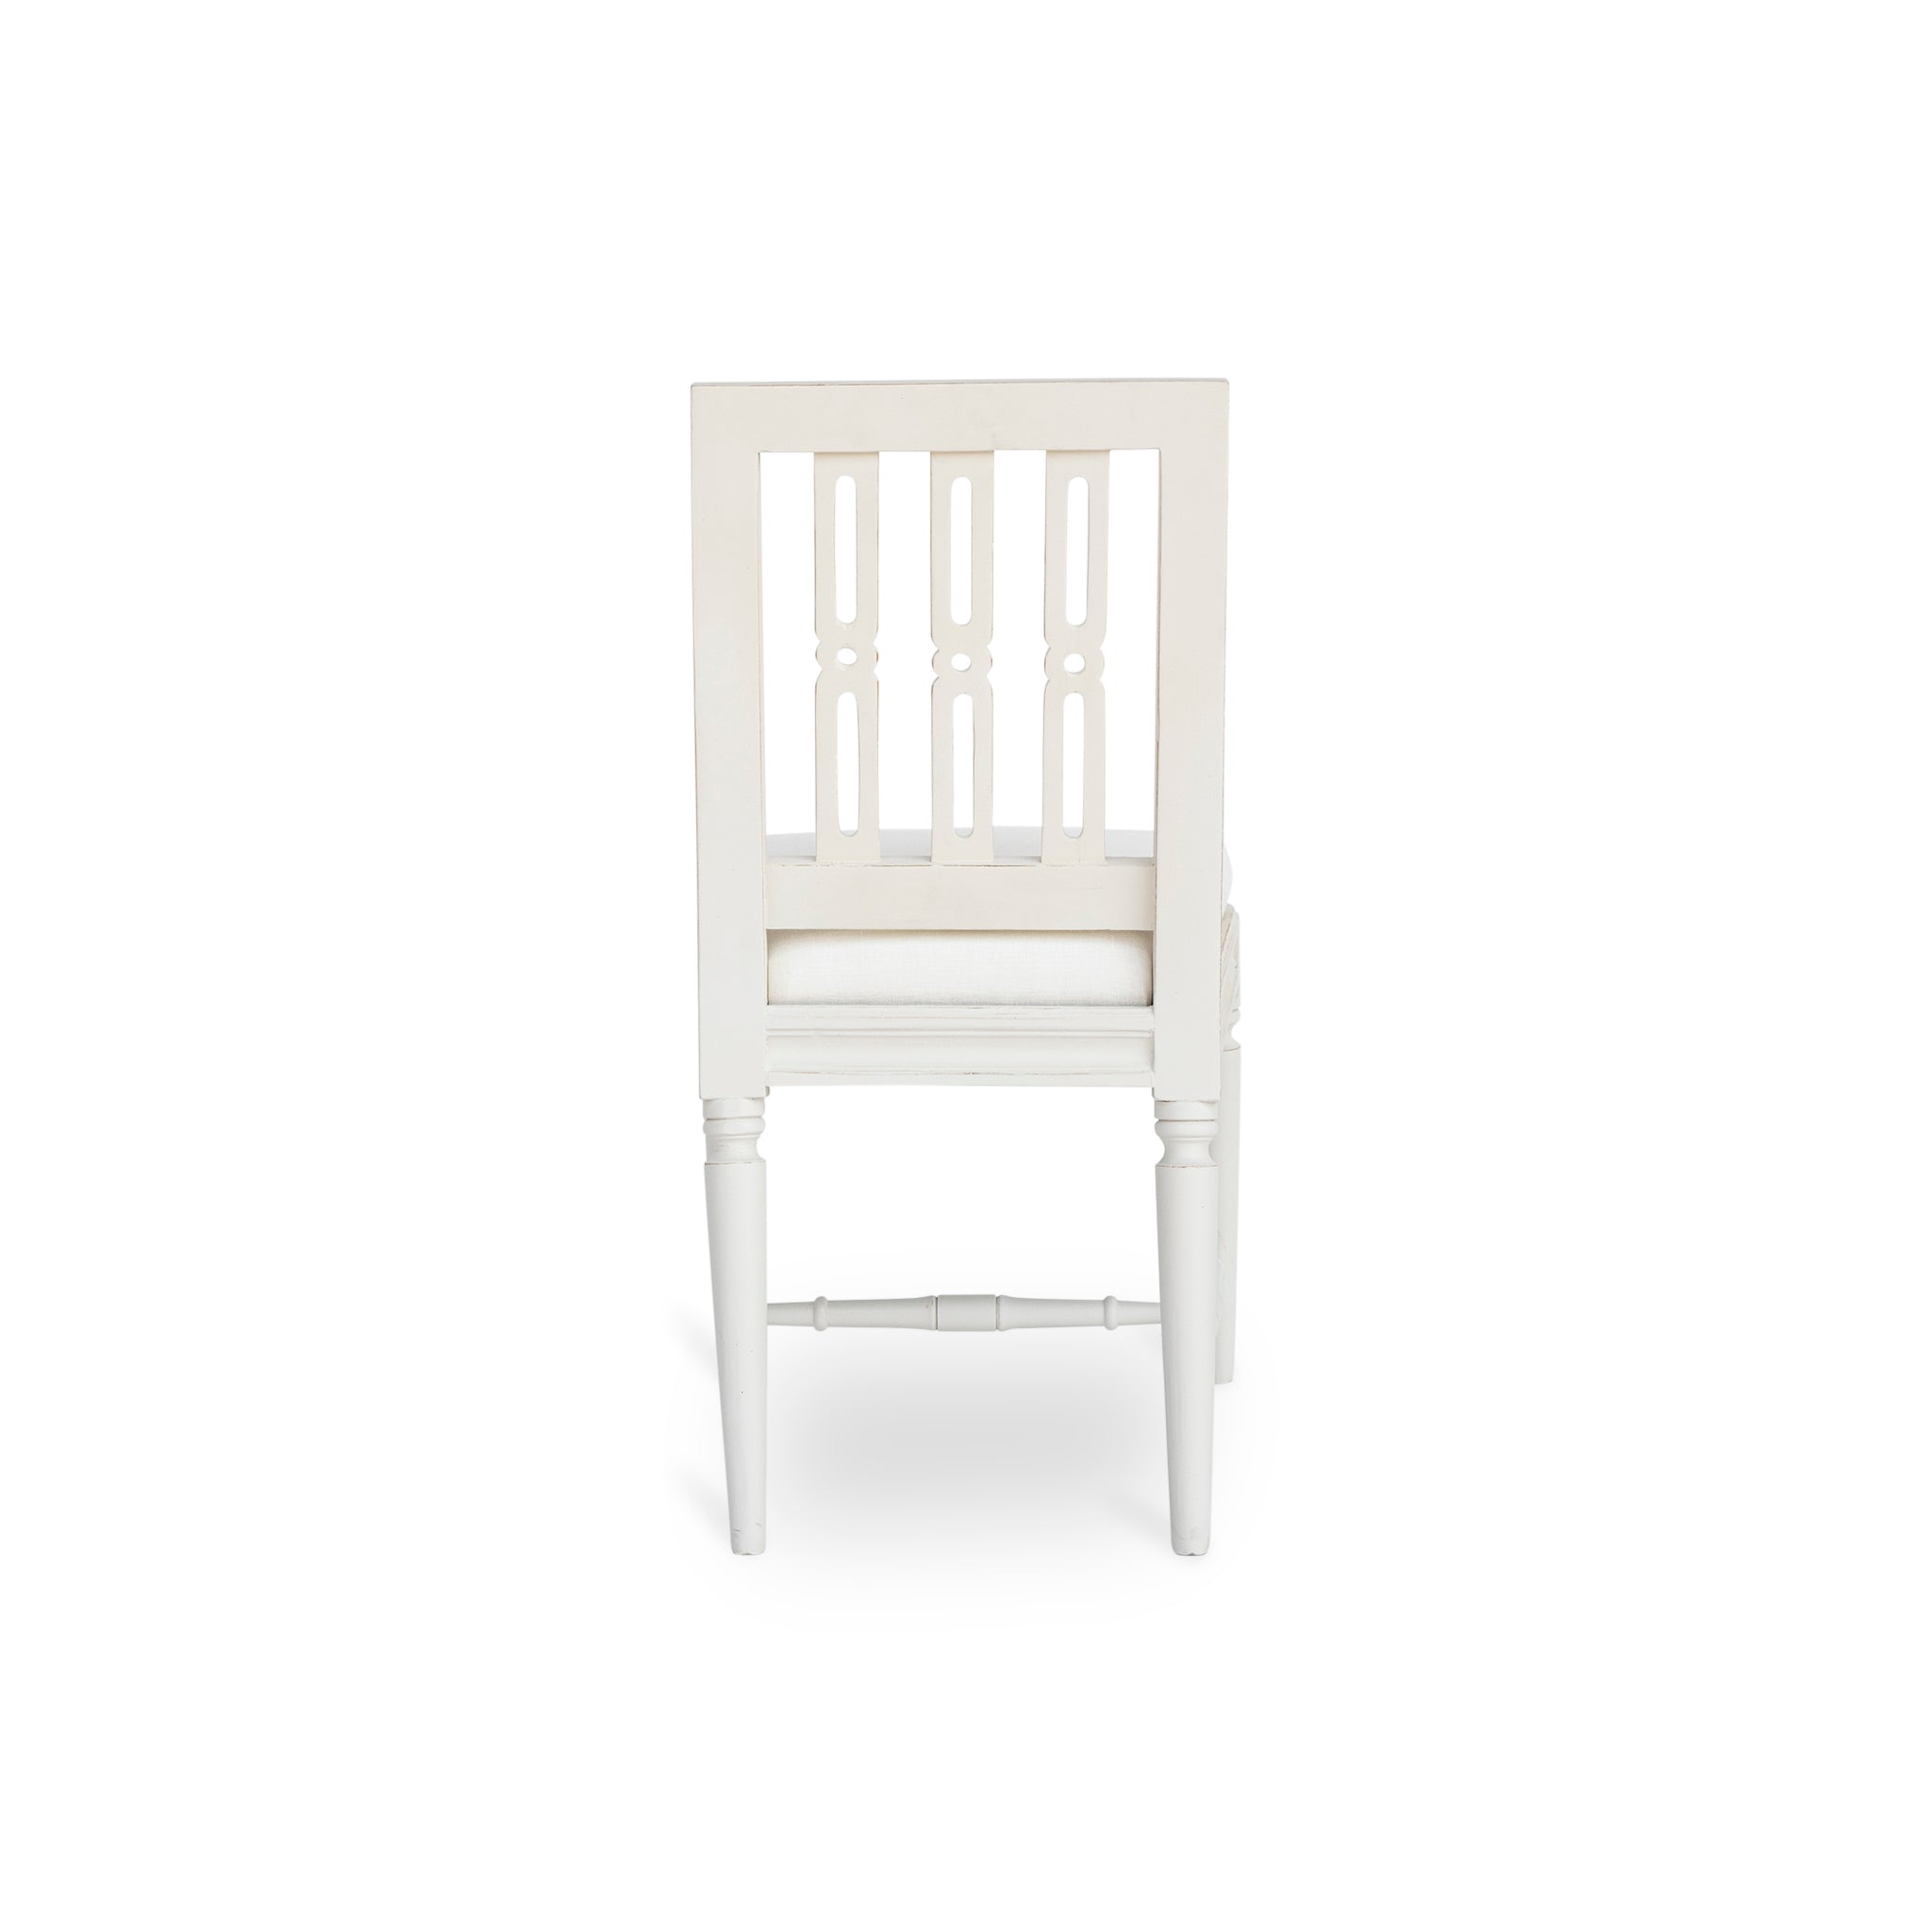 Back View of the Gustavian Dining Chair (Color - White) on a White Background